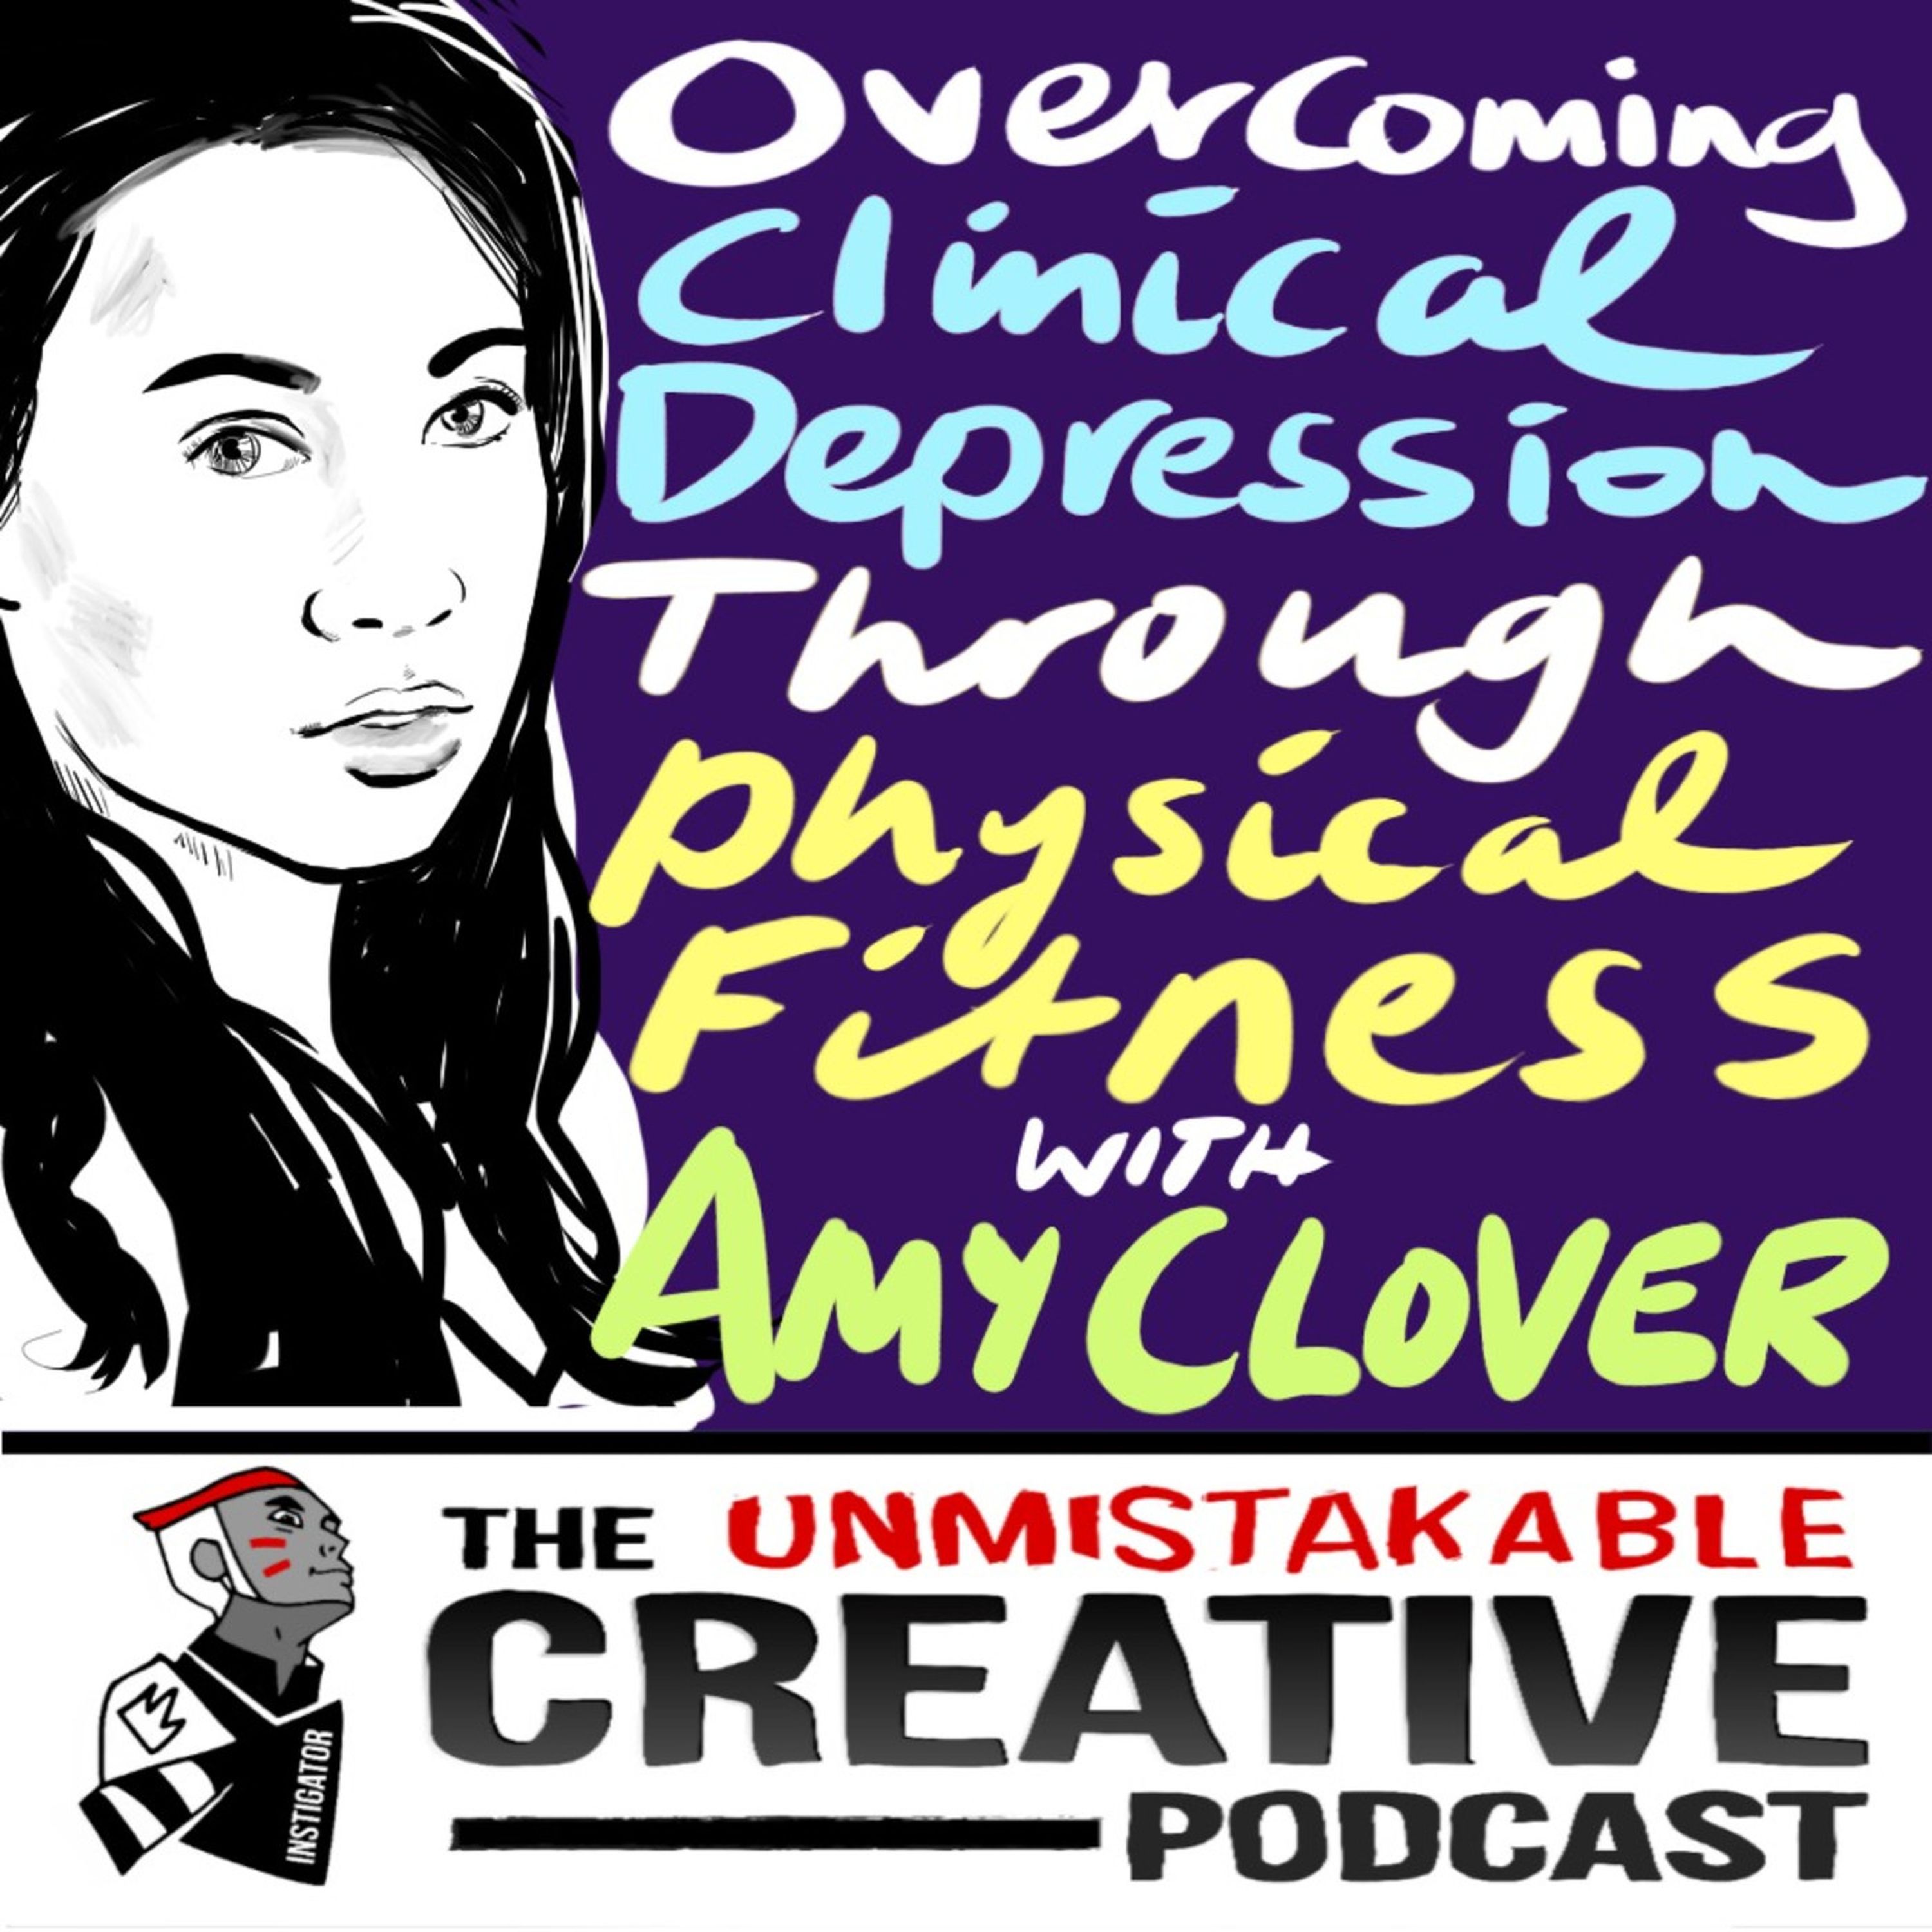 Overcoming Clinical Depression Through Physical Fitness with Amy Clover Image